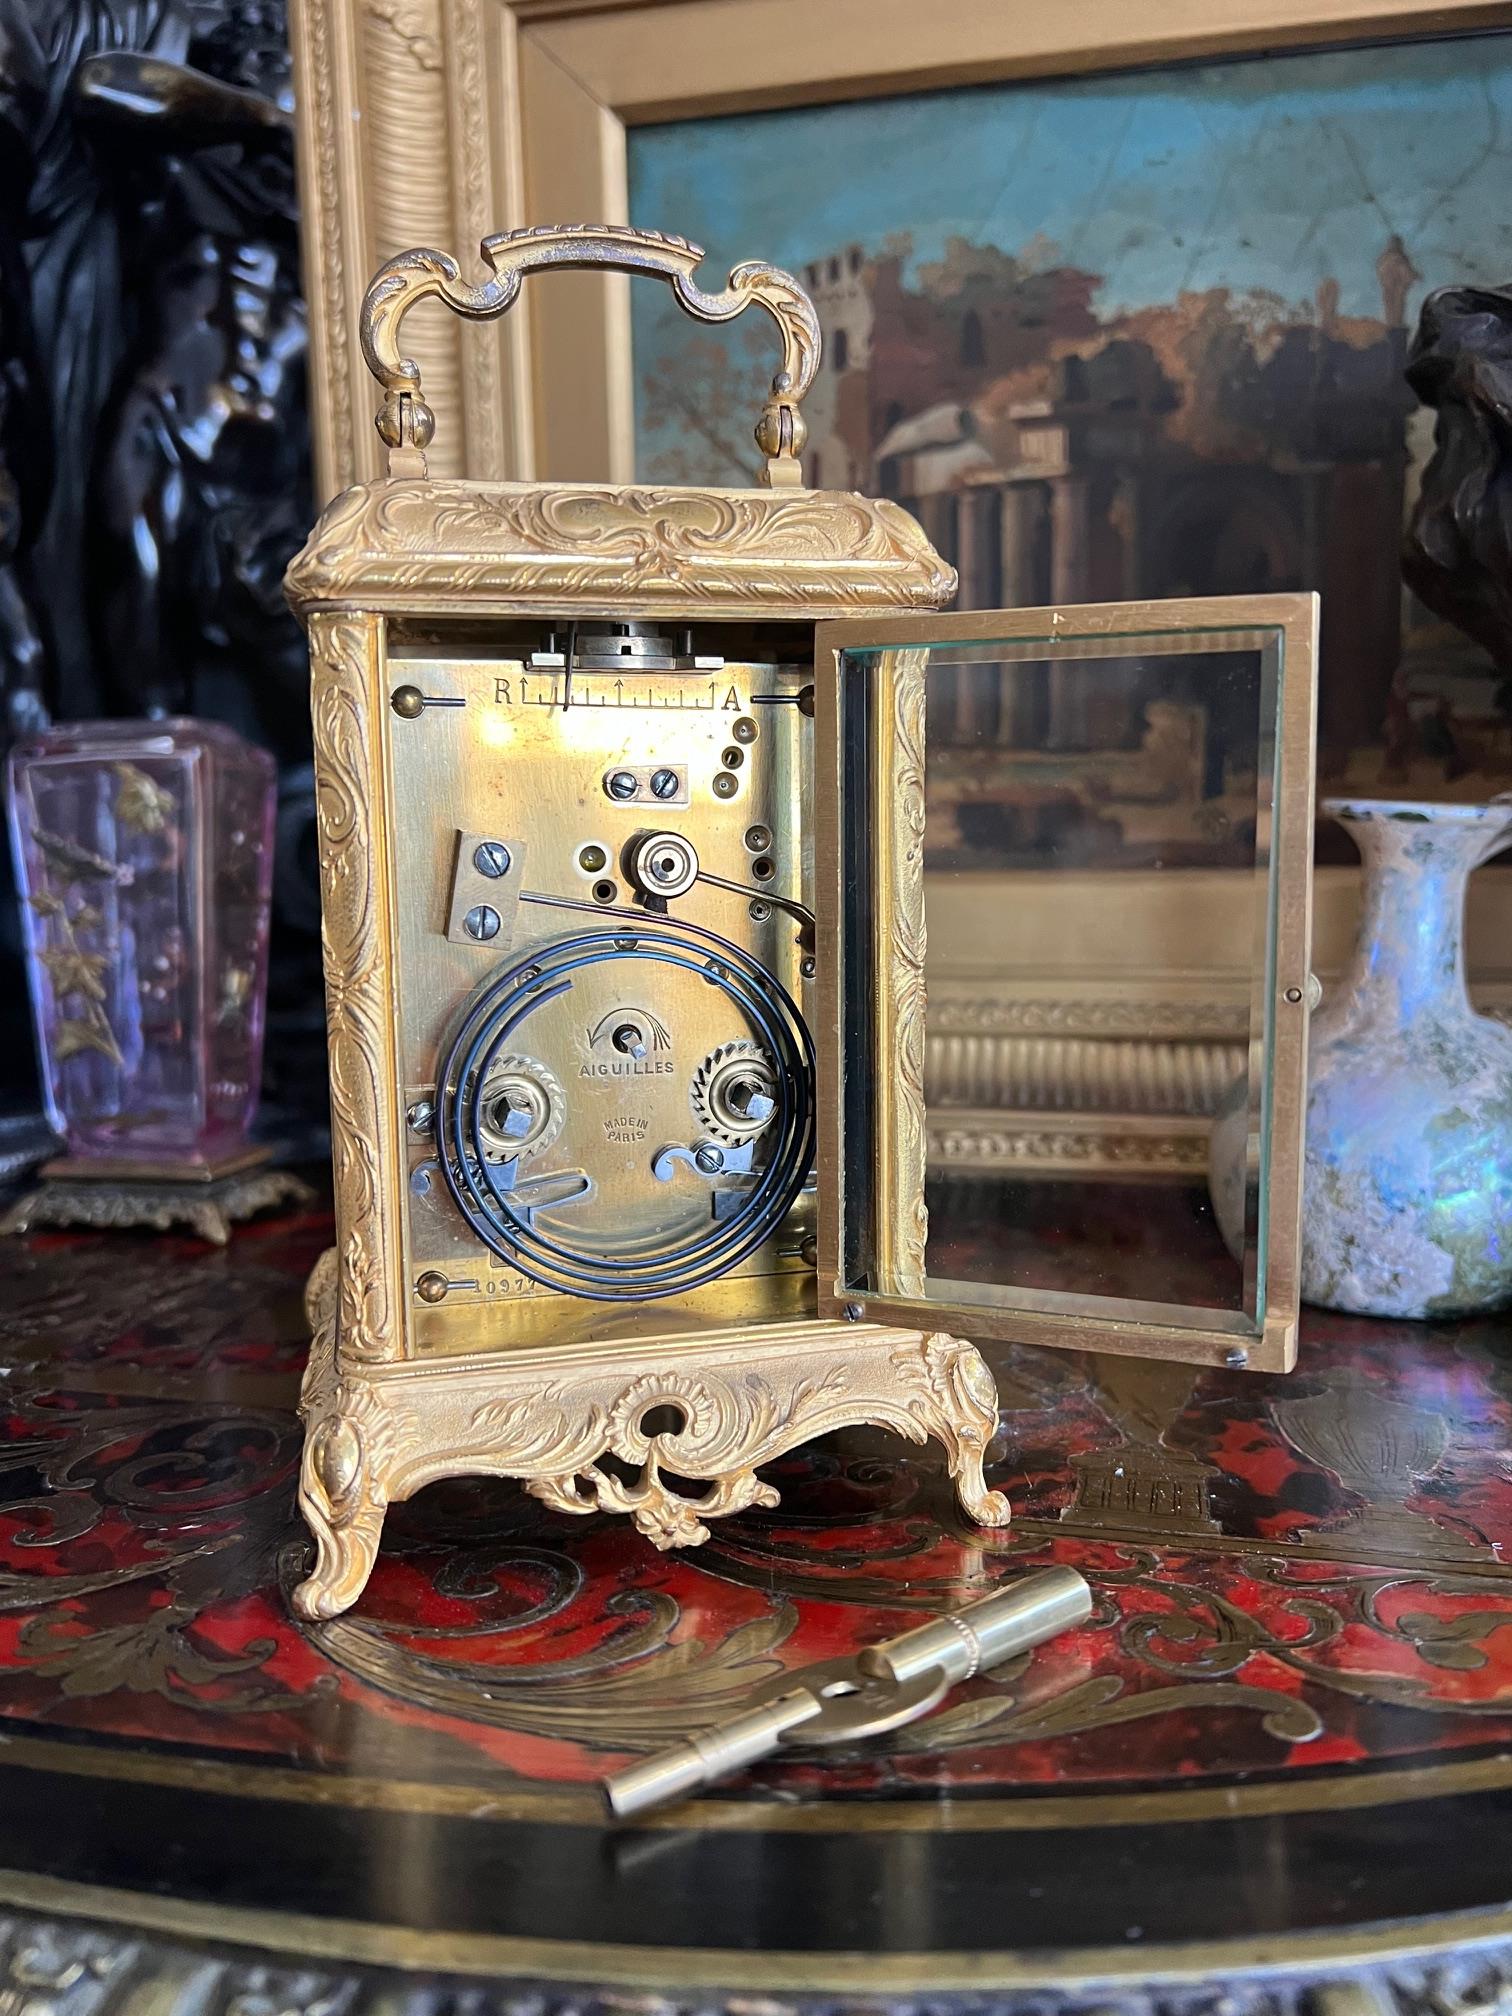 A FINE LATE 19TH CENTURY FRENCH GILT BRASS AND CLOISONNE ENAMEL CARRIAGE CLOCK - Image 7 of 8